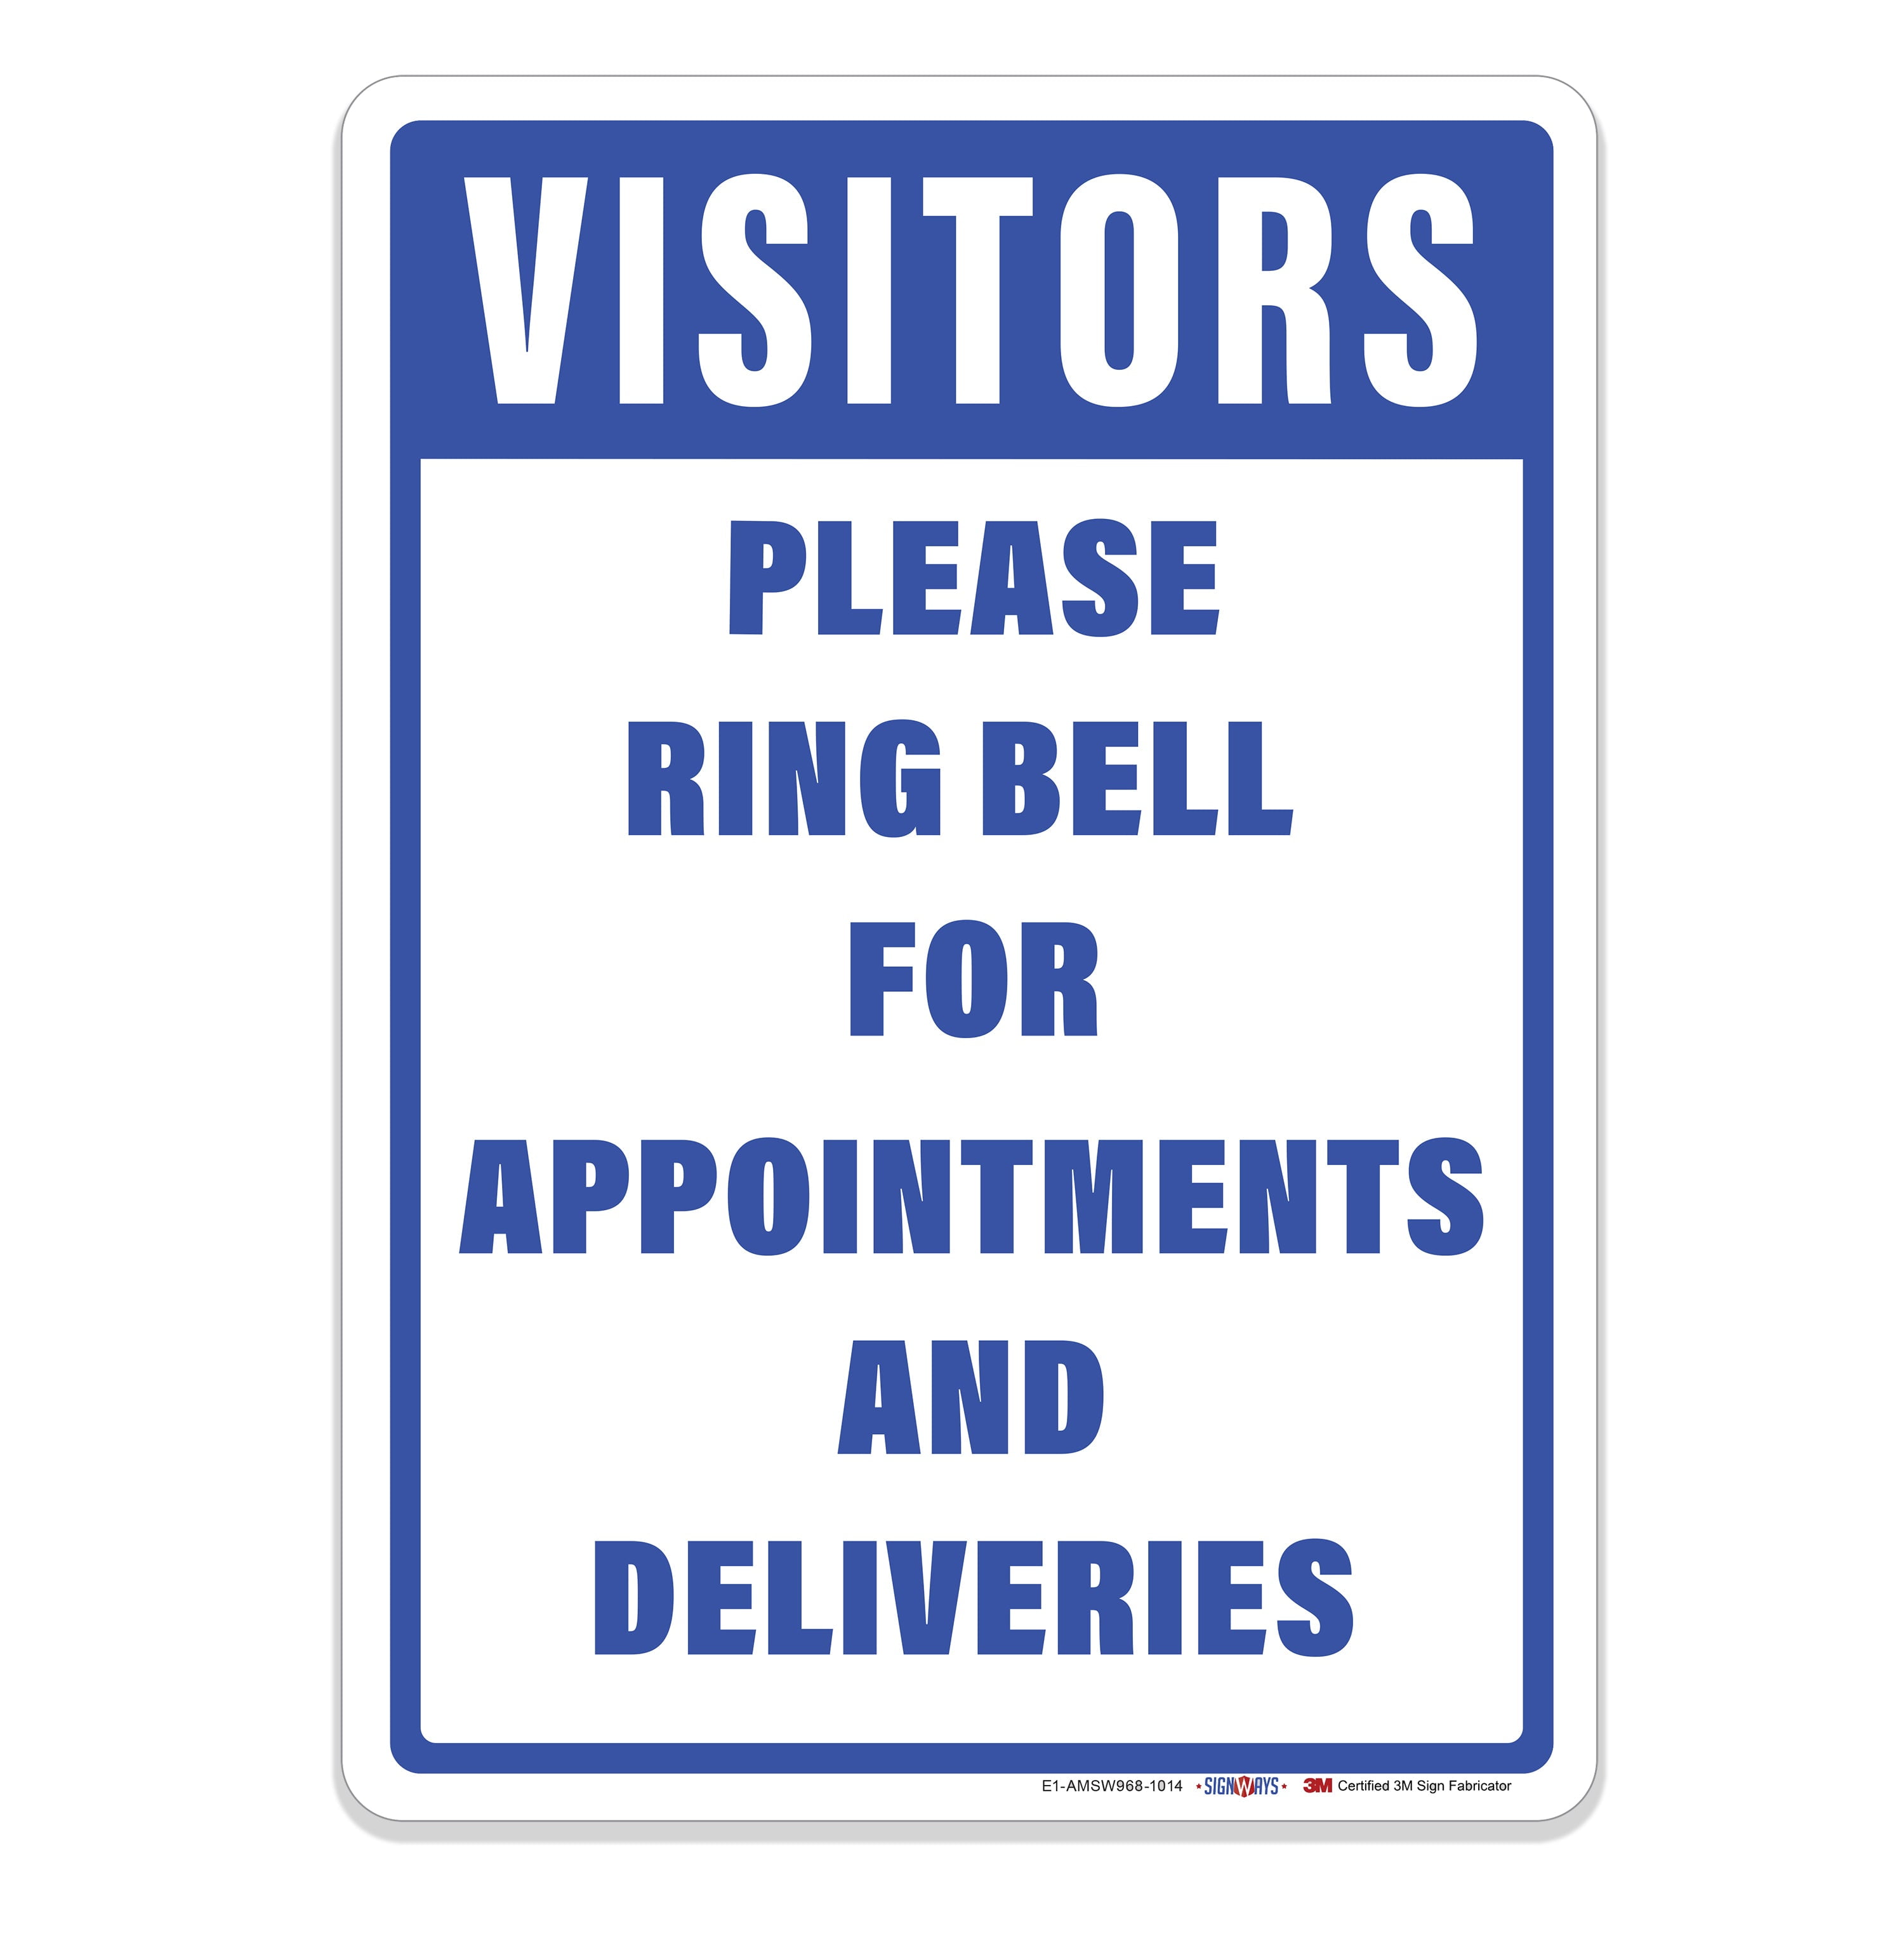 Visitors Please Ring Bell For Appointment And Deliveries Sign